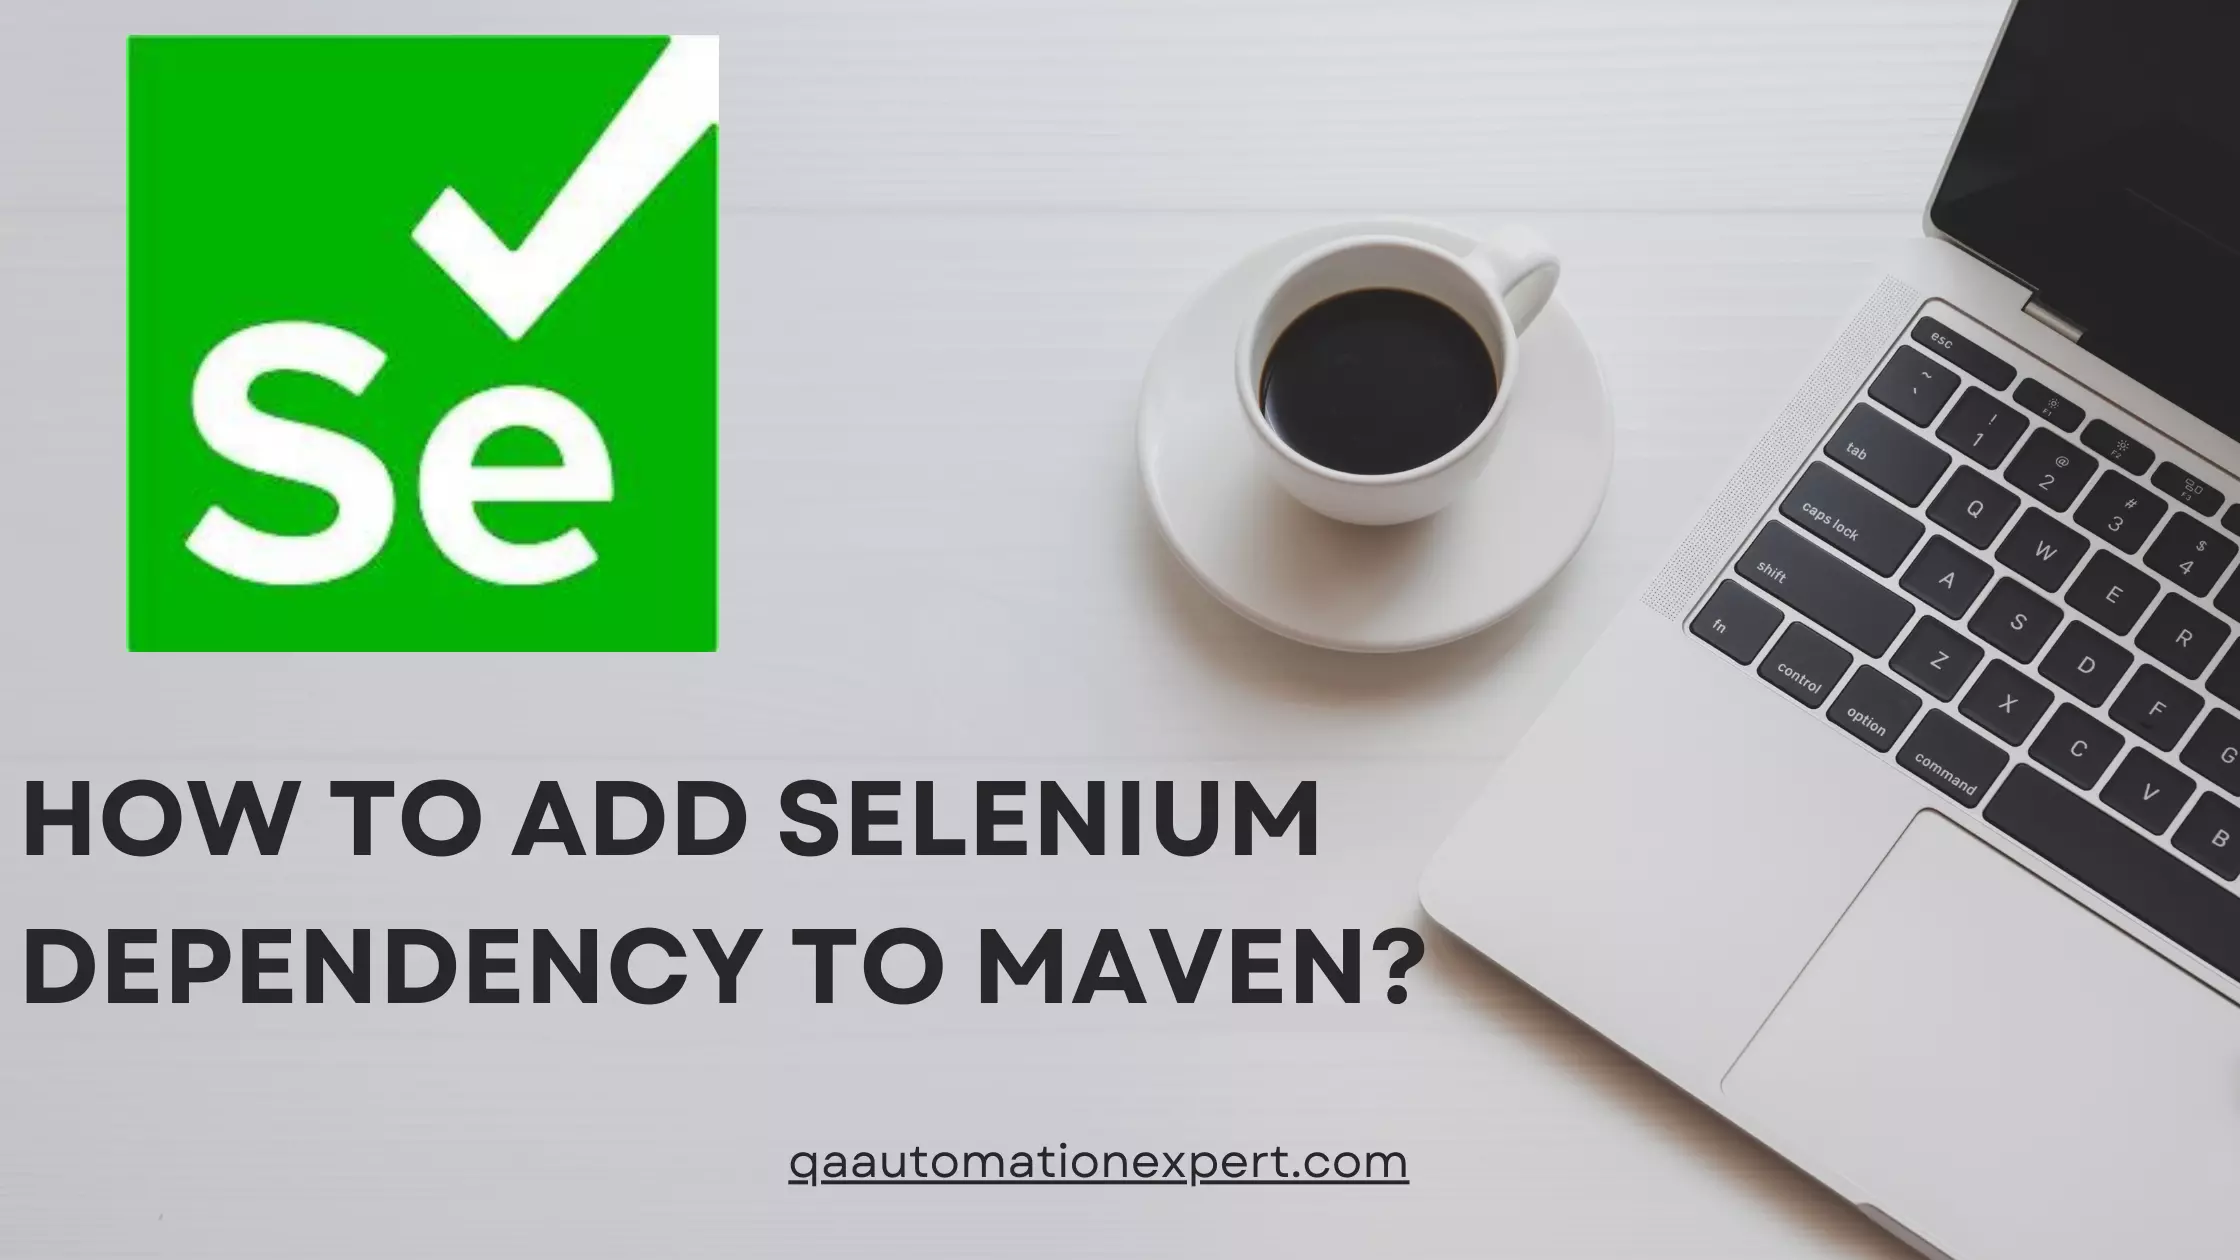 How to Add Selenium Dependency to Maven?